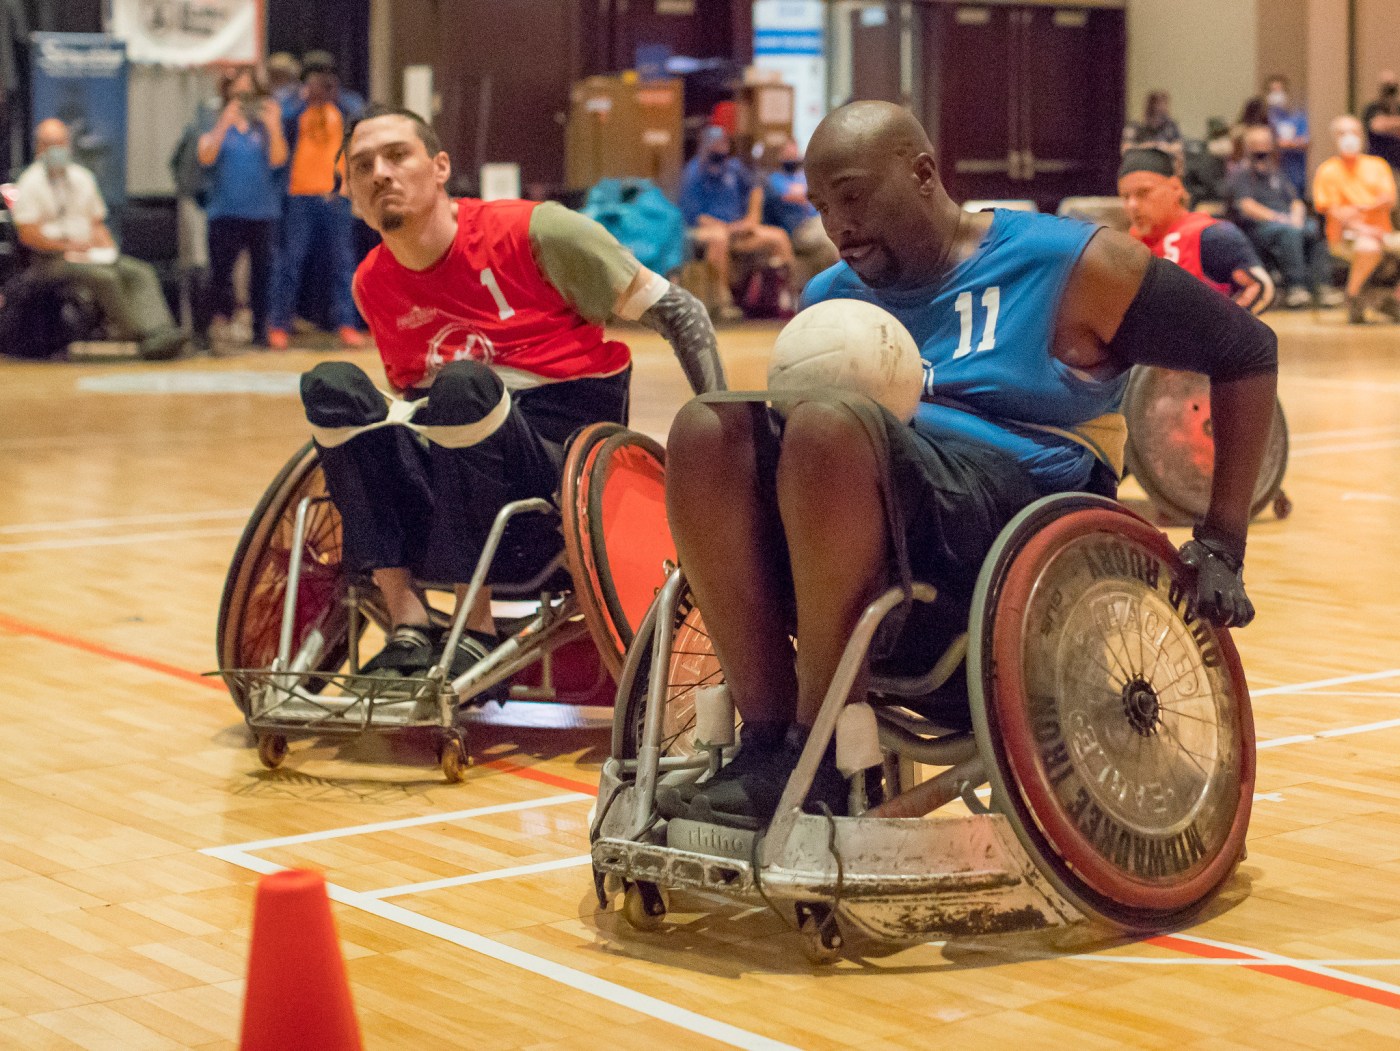 Johnny Holland, here on the verge of scoring, came out of retirement to play wheelchair rugby for the first time in 15 years.